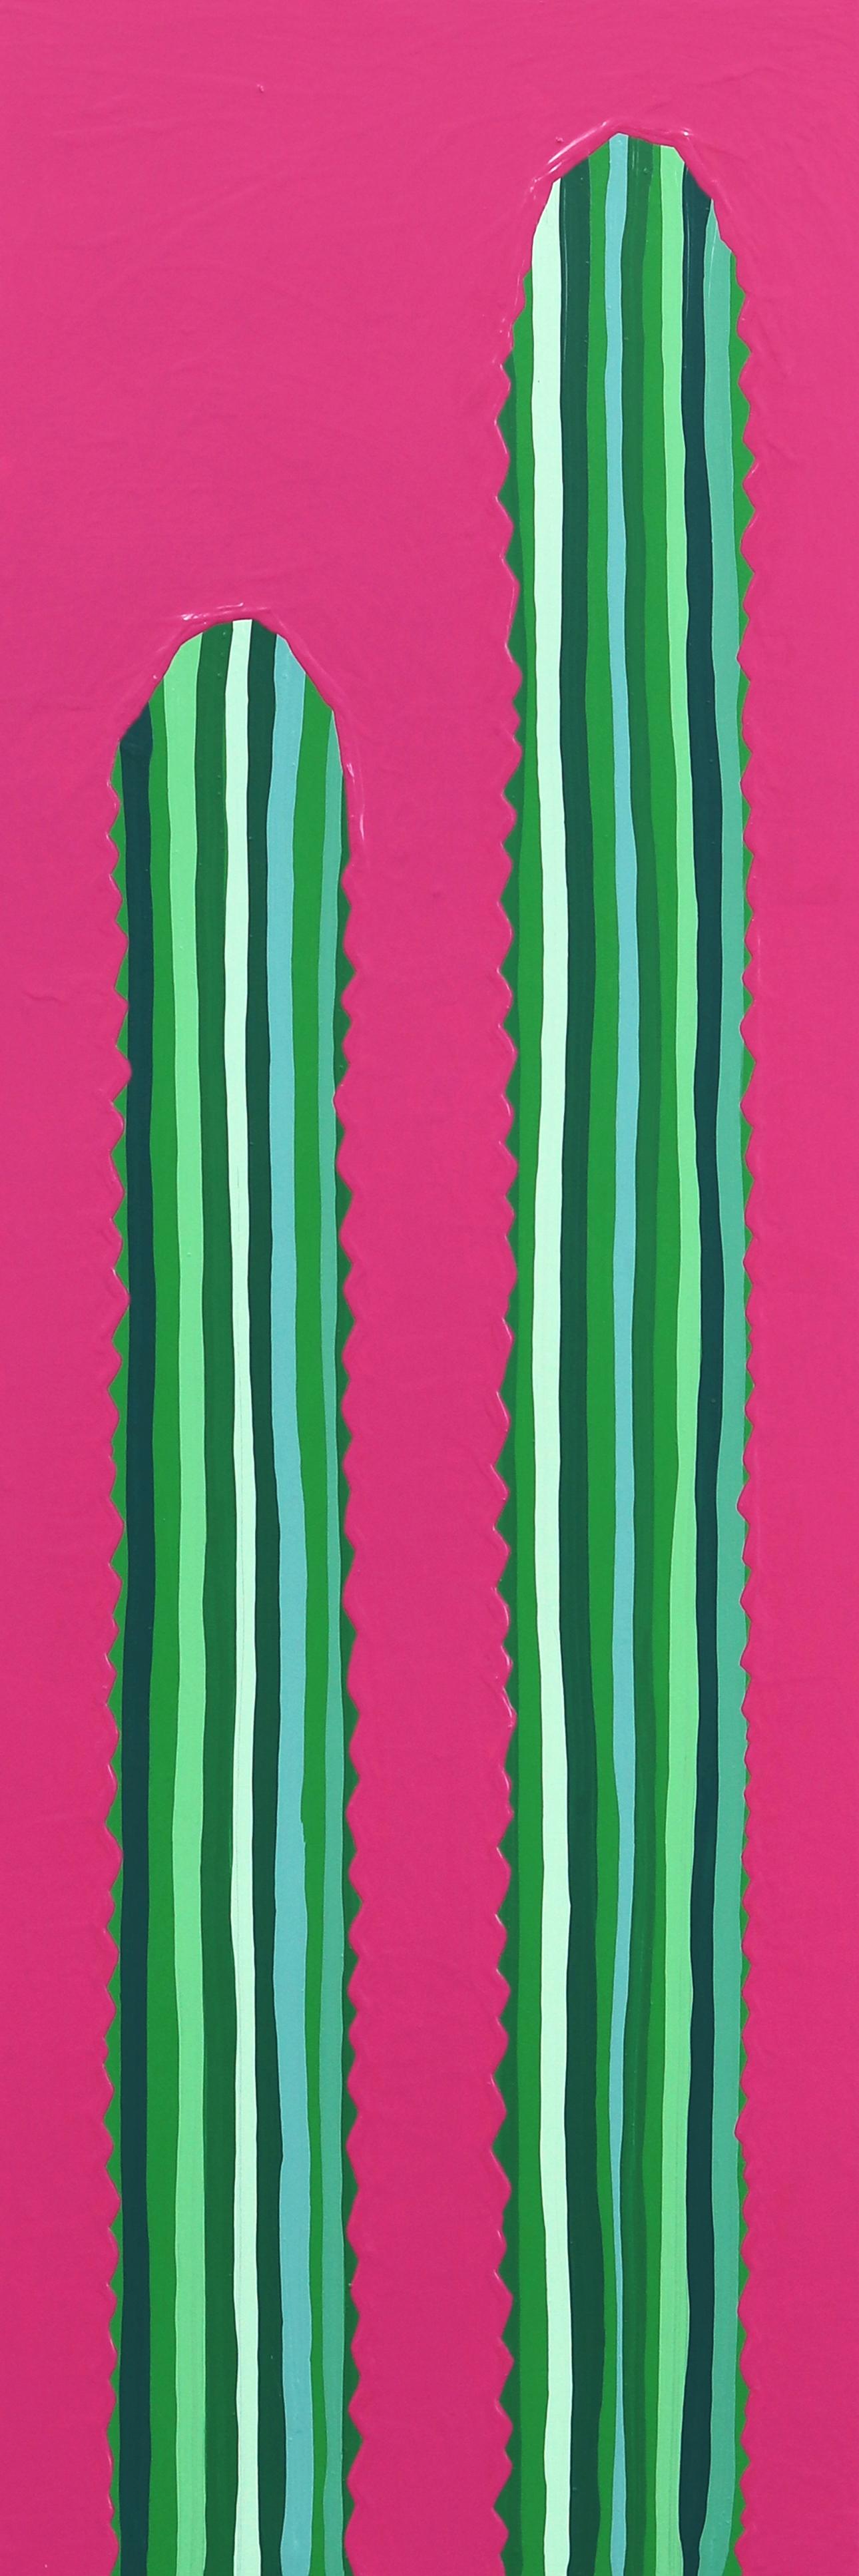 Rosa Picante - Vibrant Pink Green Southwest Inspired Pop Art Cactus Painting